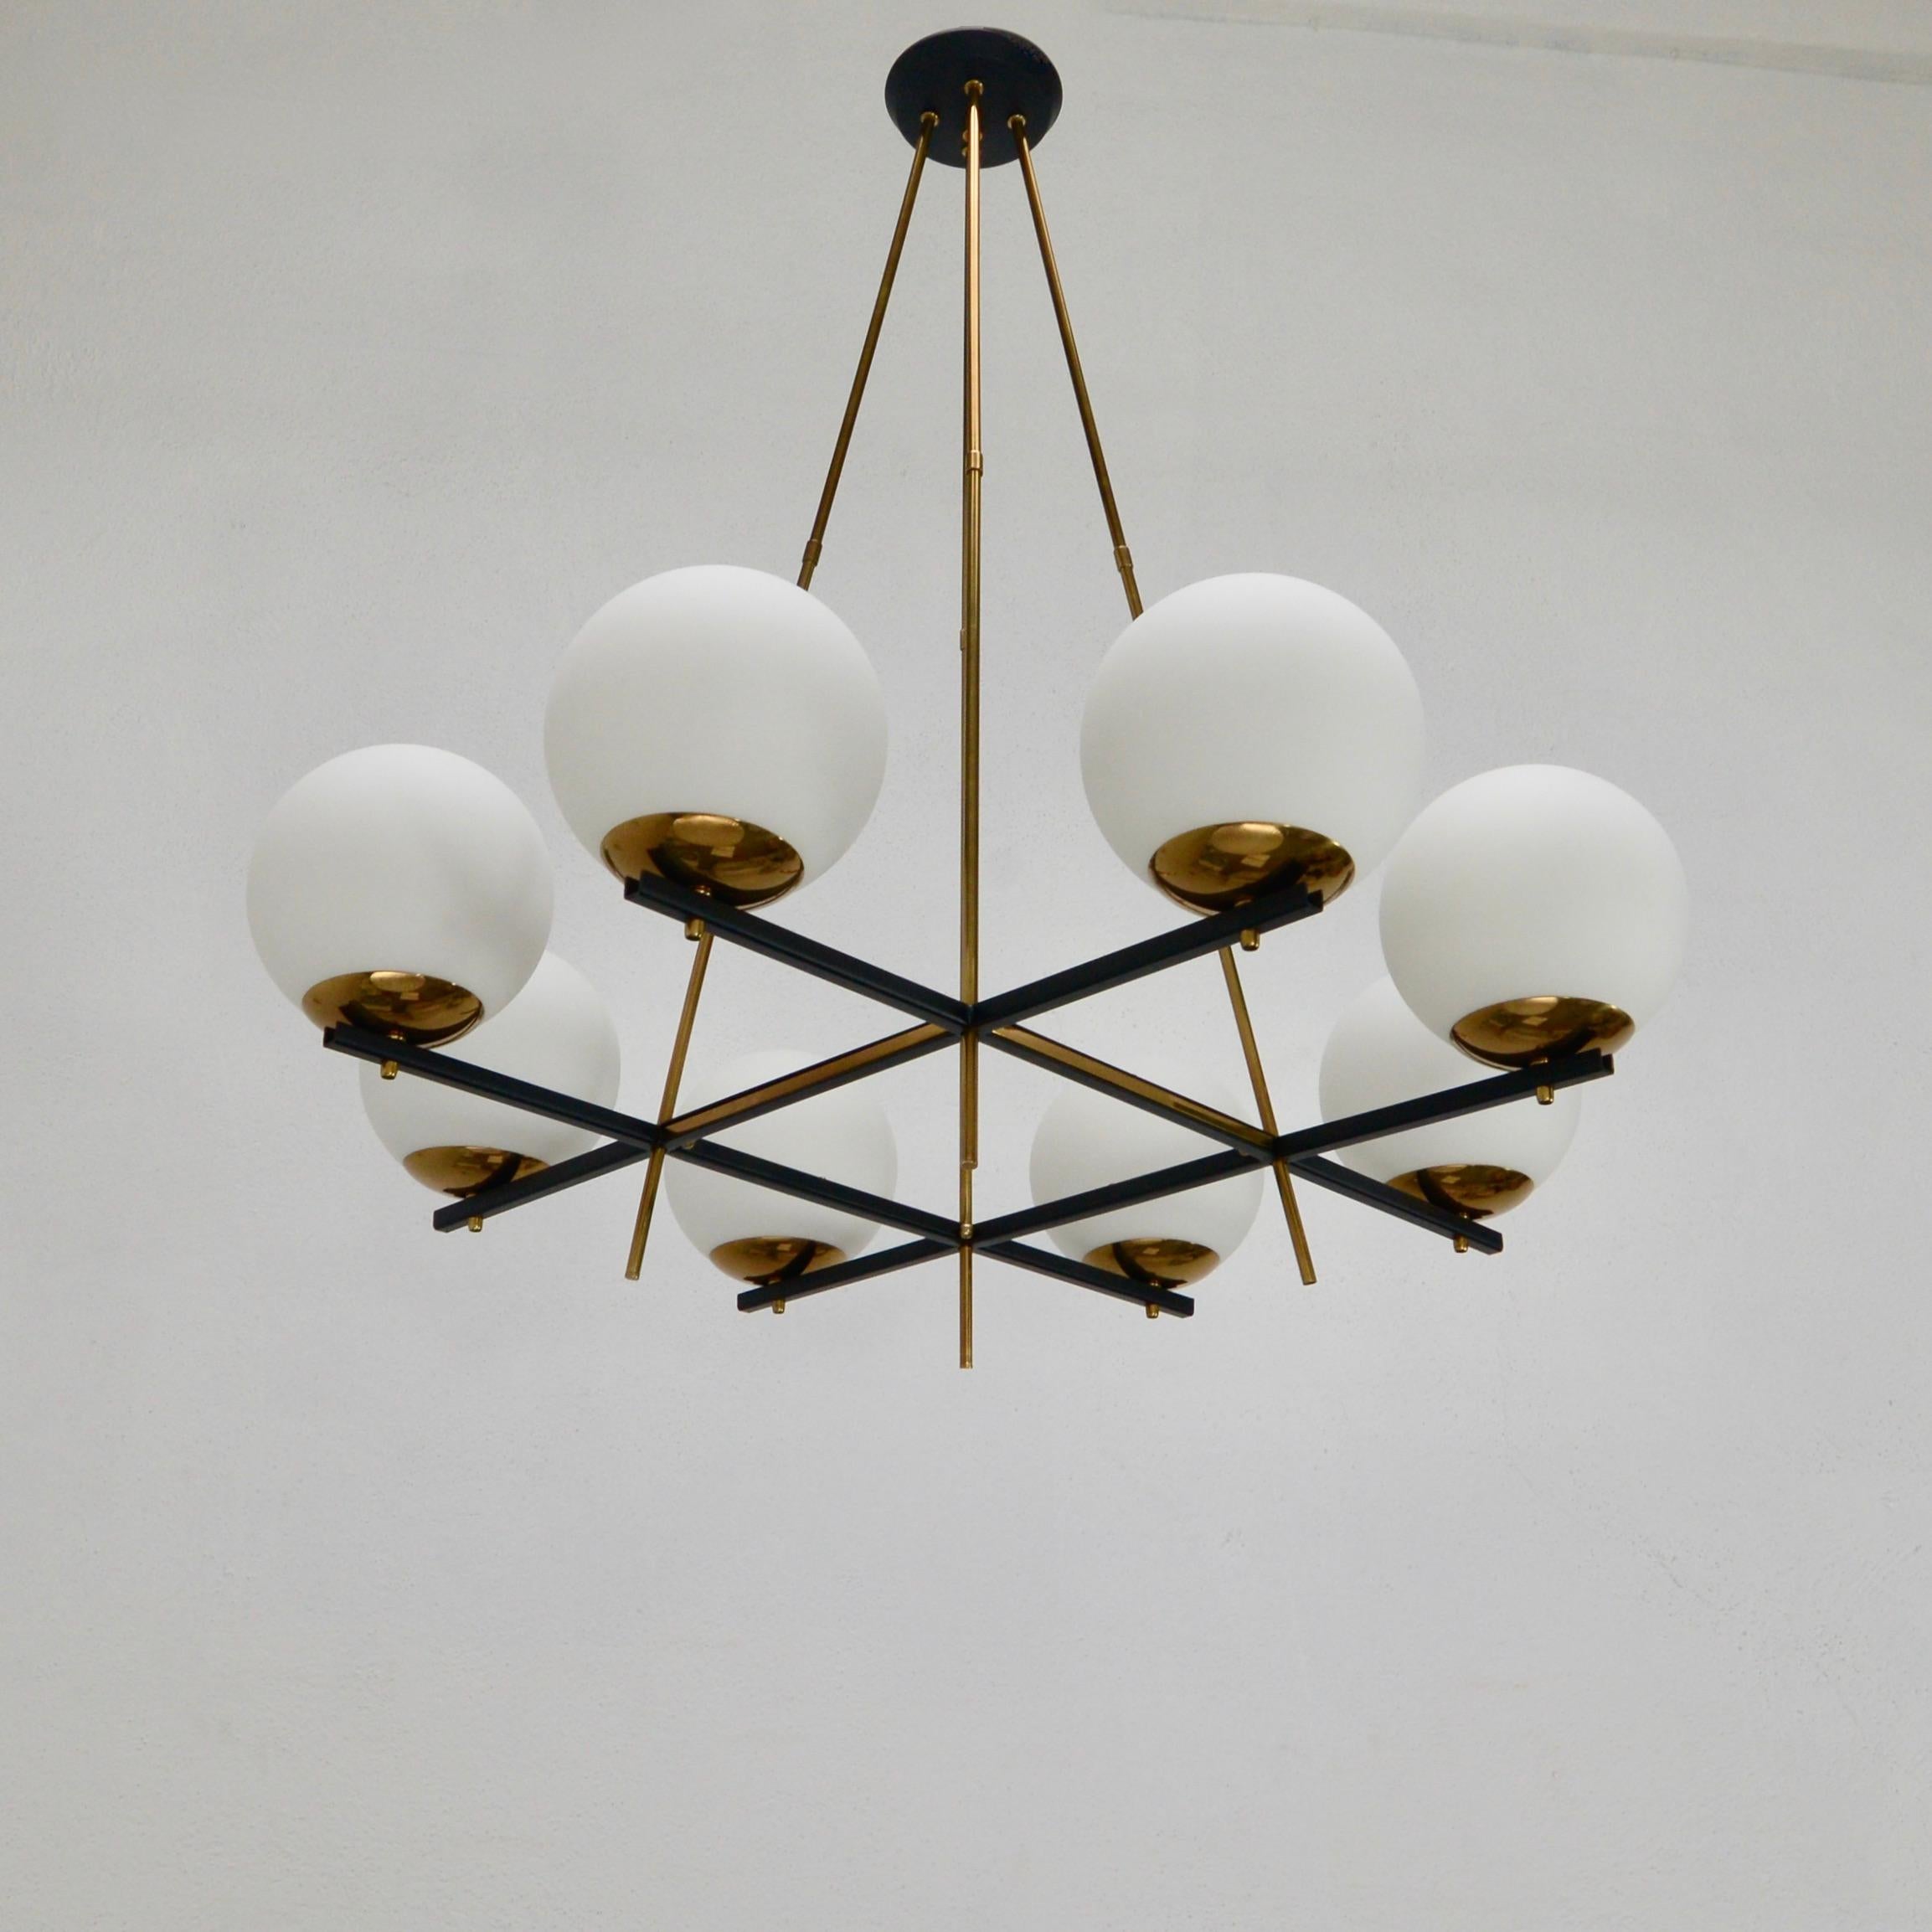 Stunning 8 globe classical midcentury 1950s Italian glass, steel, aluminum and naturally aged brass chandelier. Featuring an elegant grid pattern. With 1-E12 candelabra based sockets (1) per globe shade. Wired for use in the US. Light bulbs included